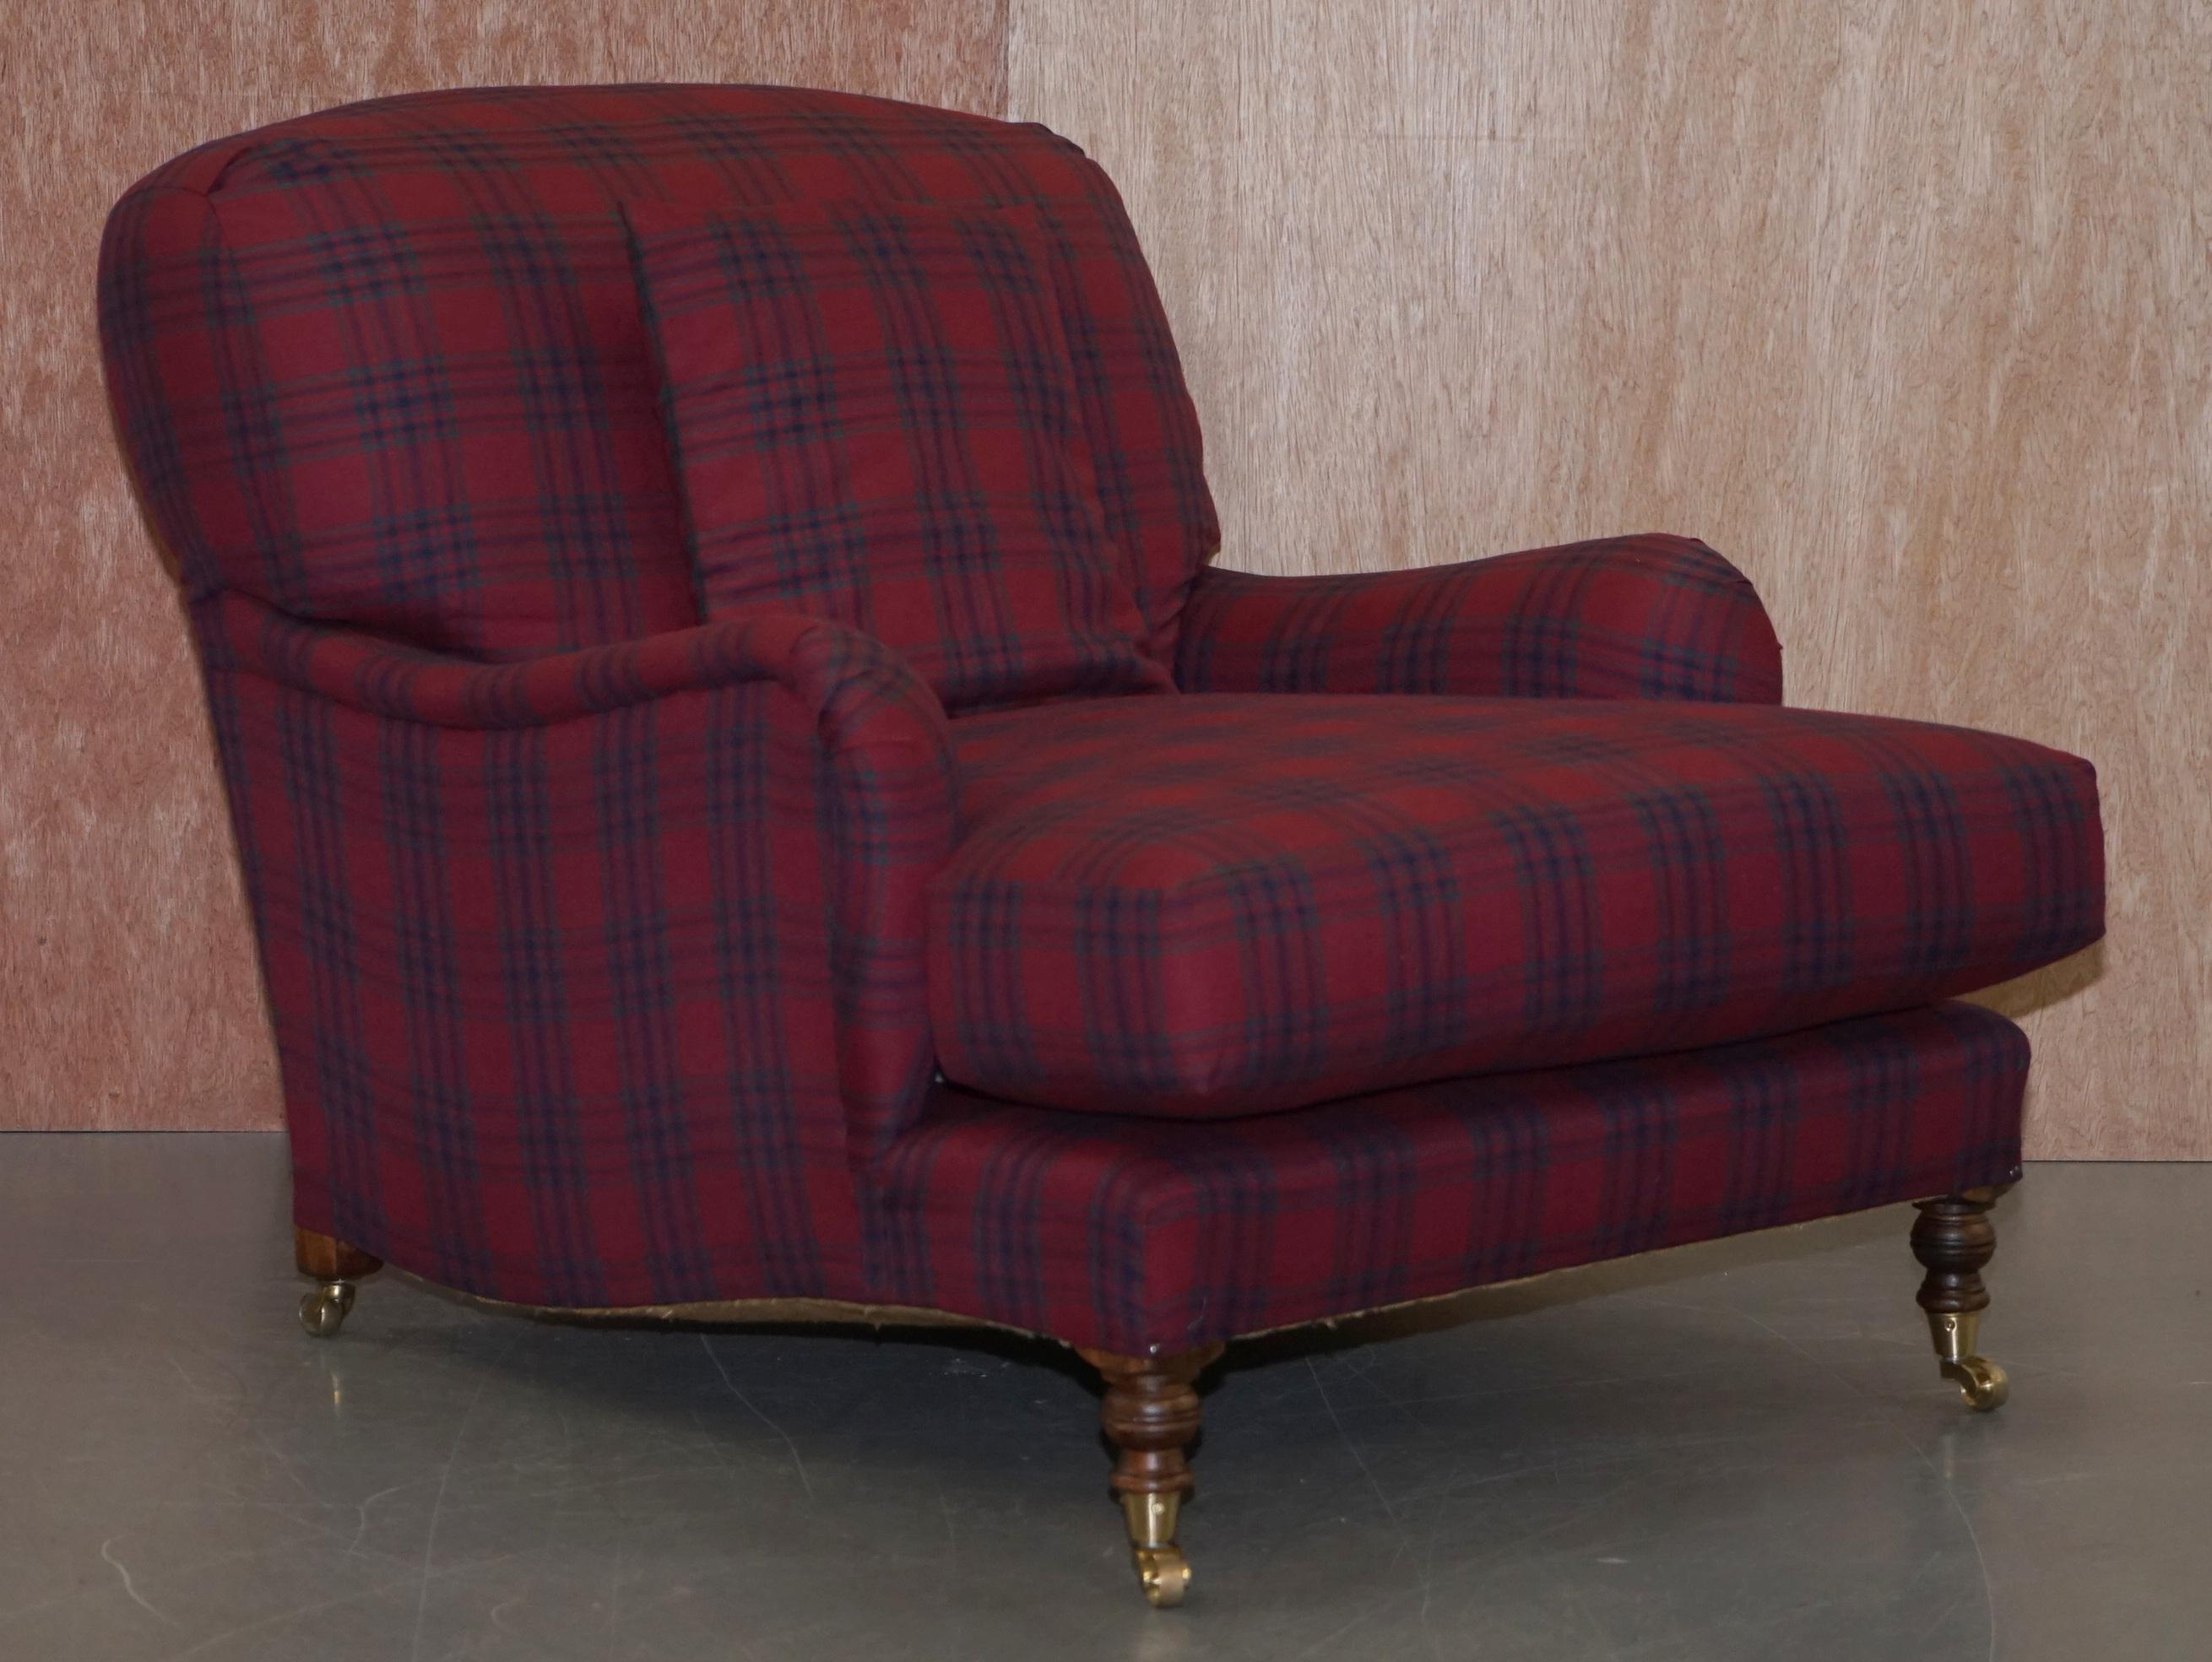 We are delighted to offer for sale this lovely pair of handmade in England George Smith Signature Scroll arm club armchairs RRP £11,500

A very good looking and well made pair. George Smith make some of the finest seating in England today, they